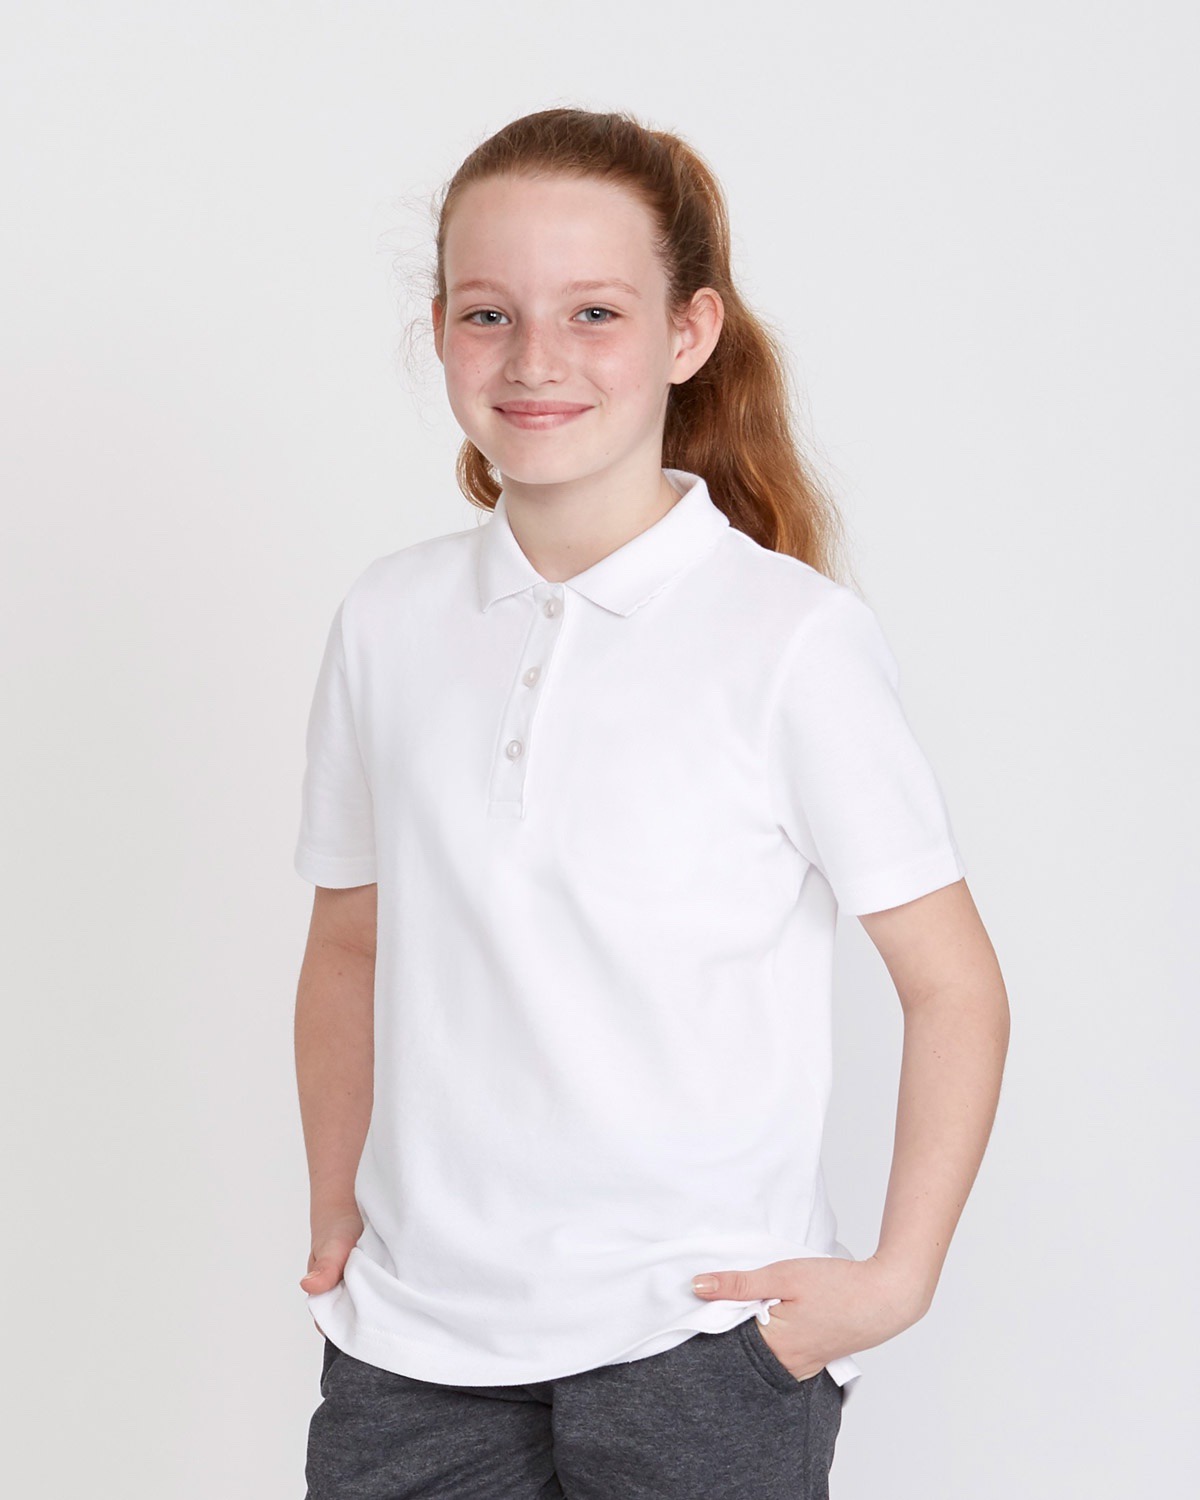 Shortcuts Plush Doll chain Dunnes Stores Women's Polo Shirts Top Sellers, 60% OFF | wolfnebraska.com